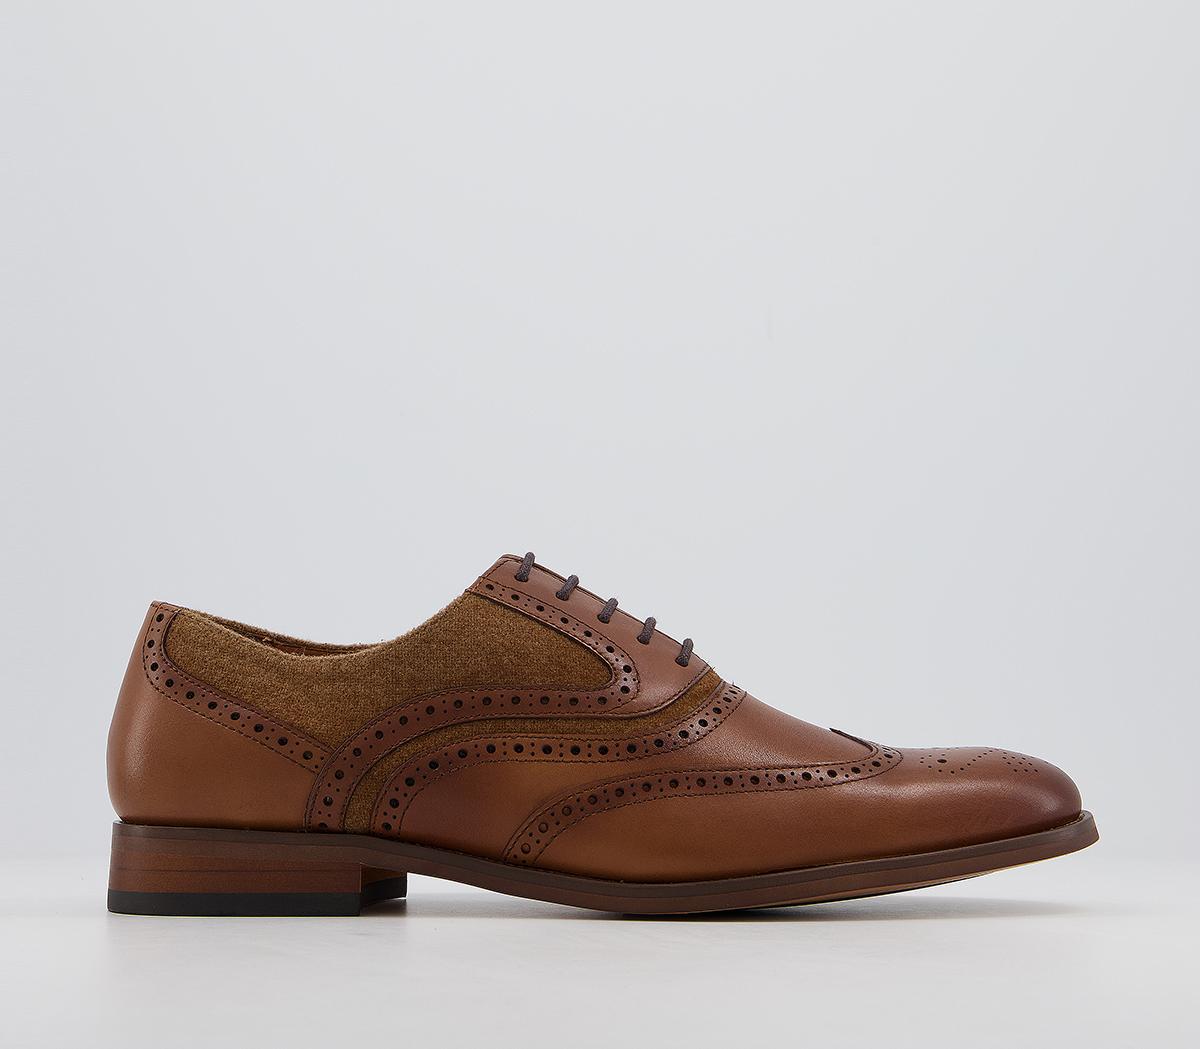 OFFICEInfuse BroguesTan Leather Taupe Textile